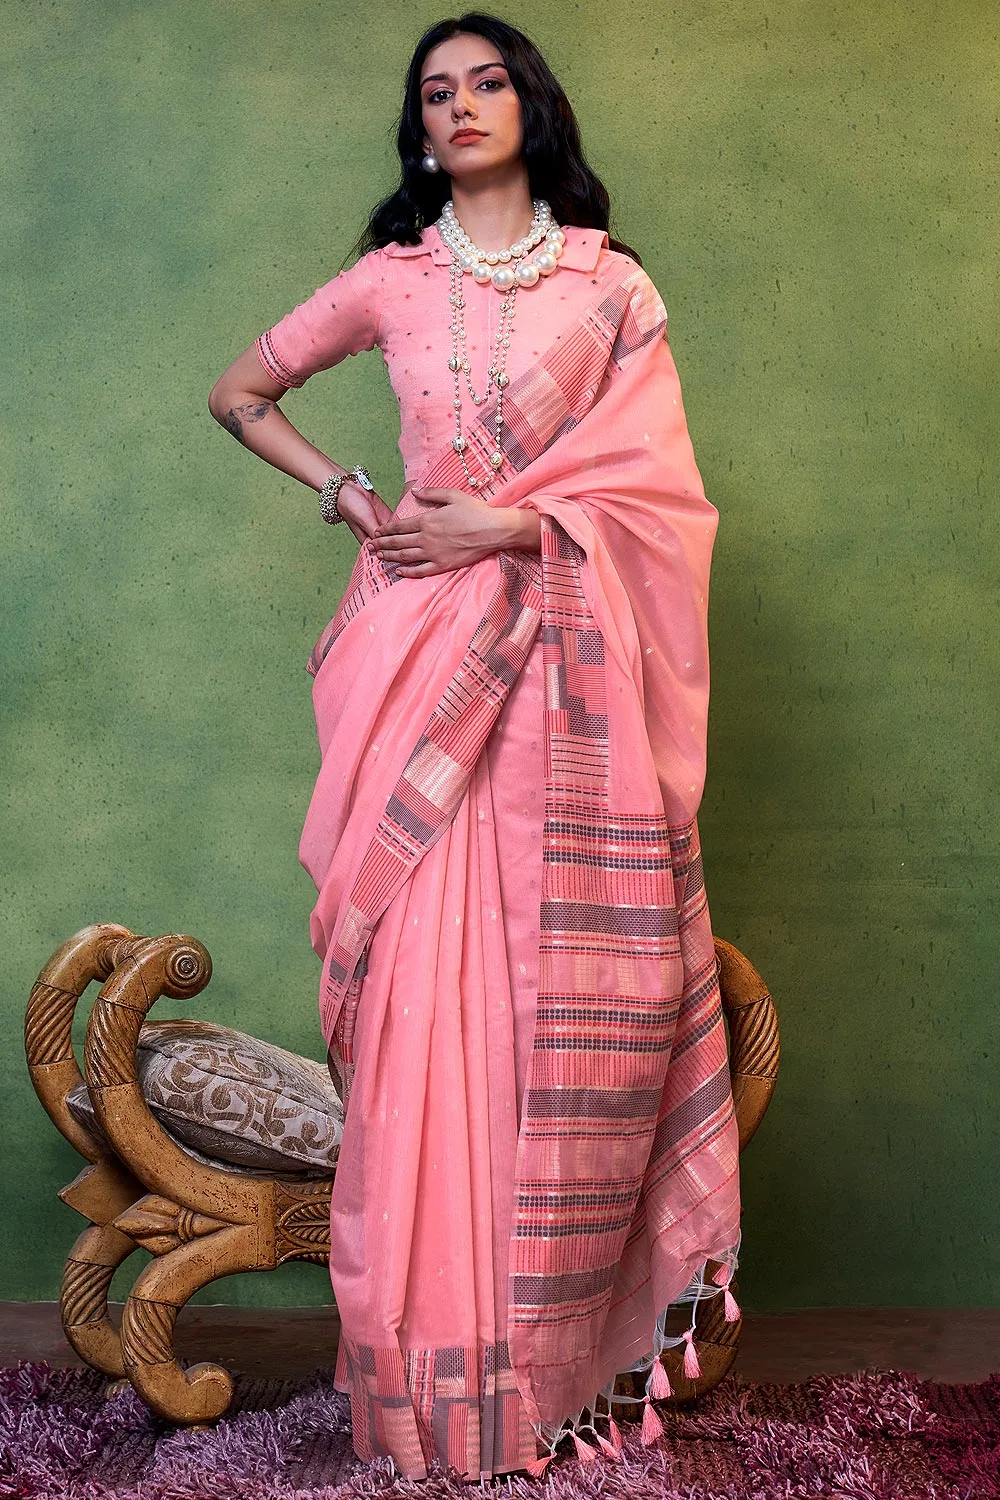 Pretty in Pink: Handwoven Pink Cotton Silk Saree with Brocade Blouse